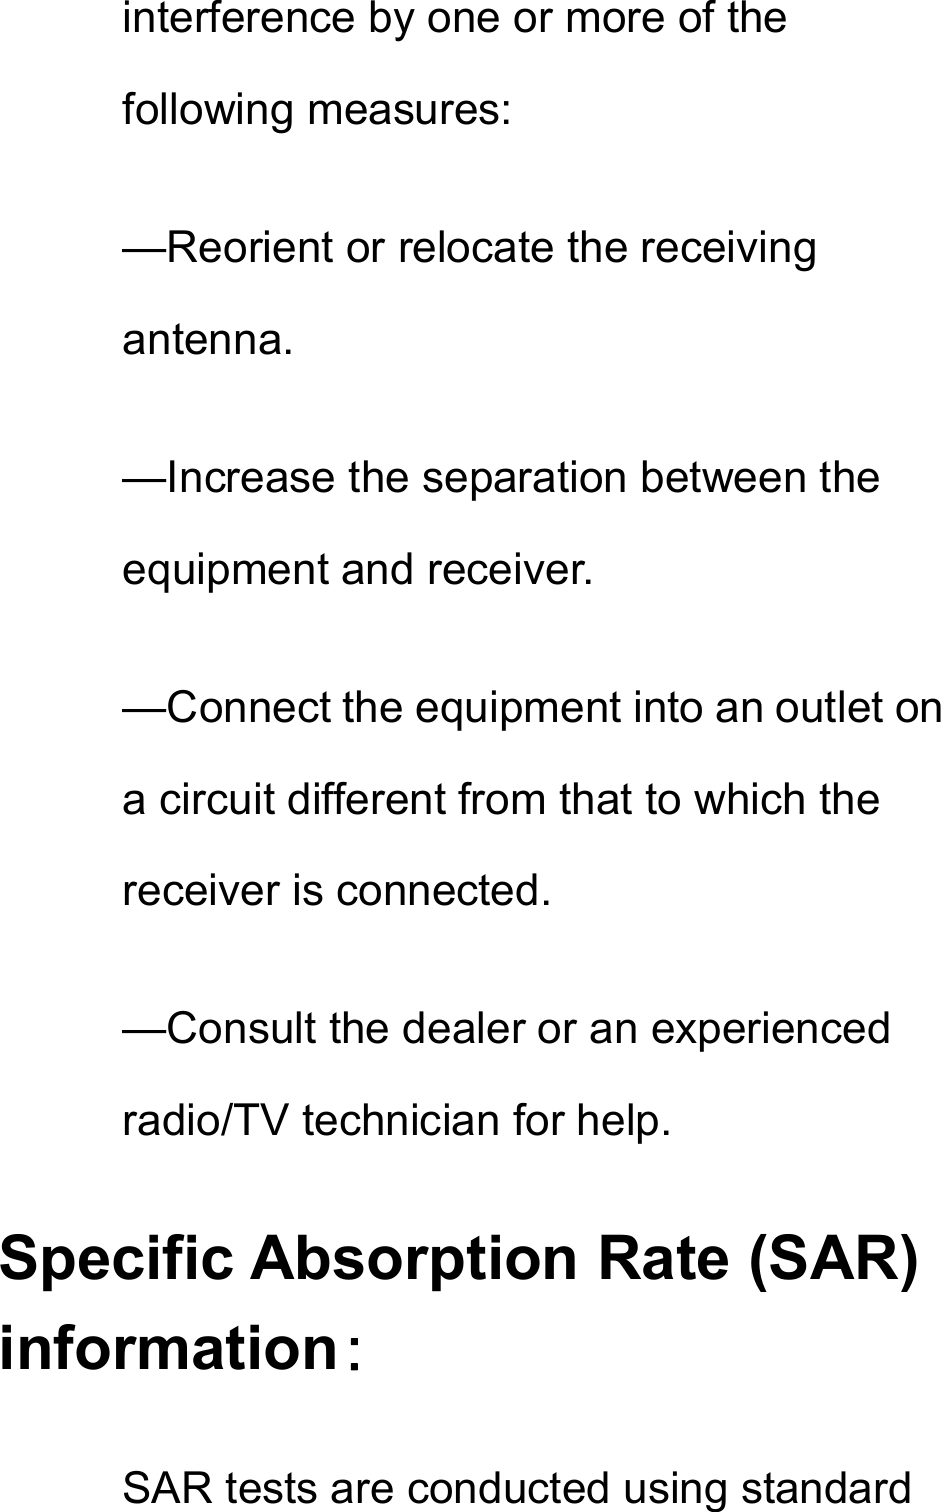 interference by one or more of the following measures: —Reorient or relocate the receiving antenna. —Increase the separation between the equipment and receiver. —Connect the equipment into an outlet on a circuit different from that to which the receiver is connected. —Consult the dealer or an experienced radio/TV technician for help. Specific Absorption Rate (SAR) information： SAR tests are conducted using standard 